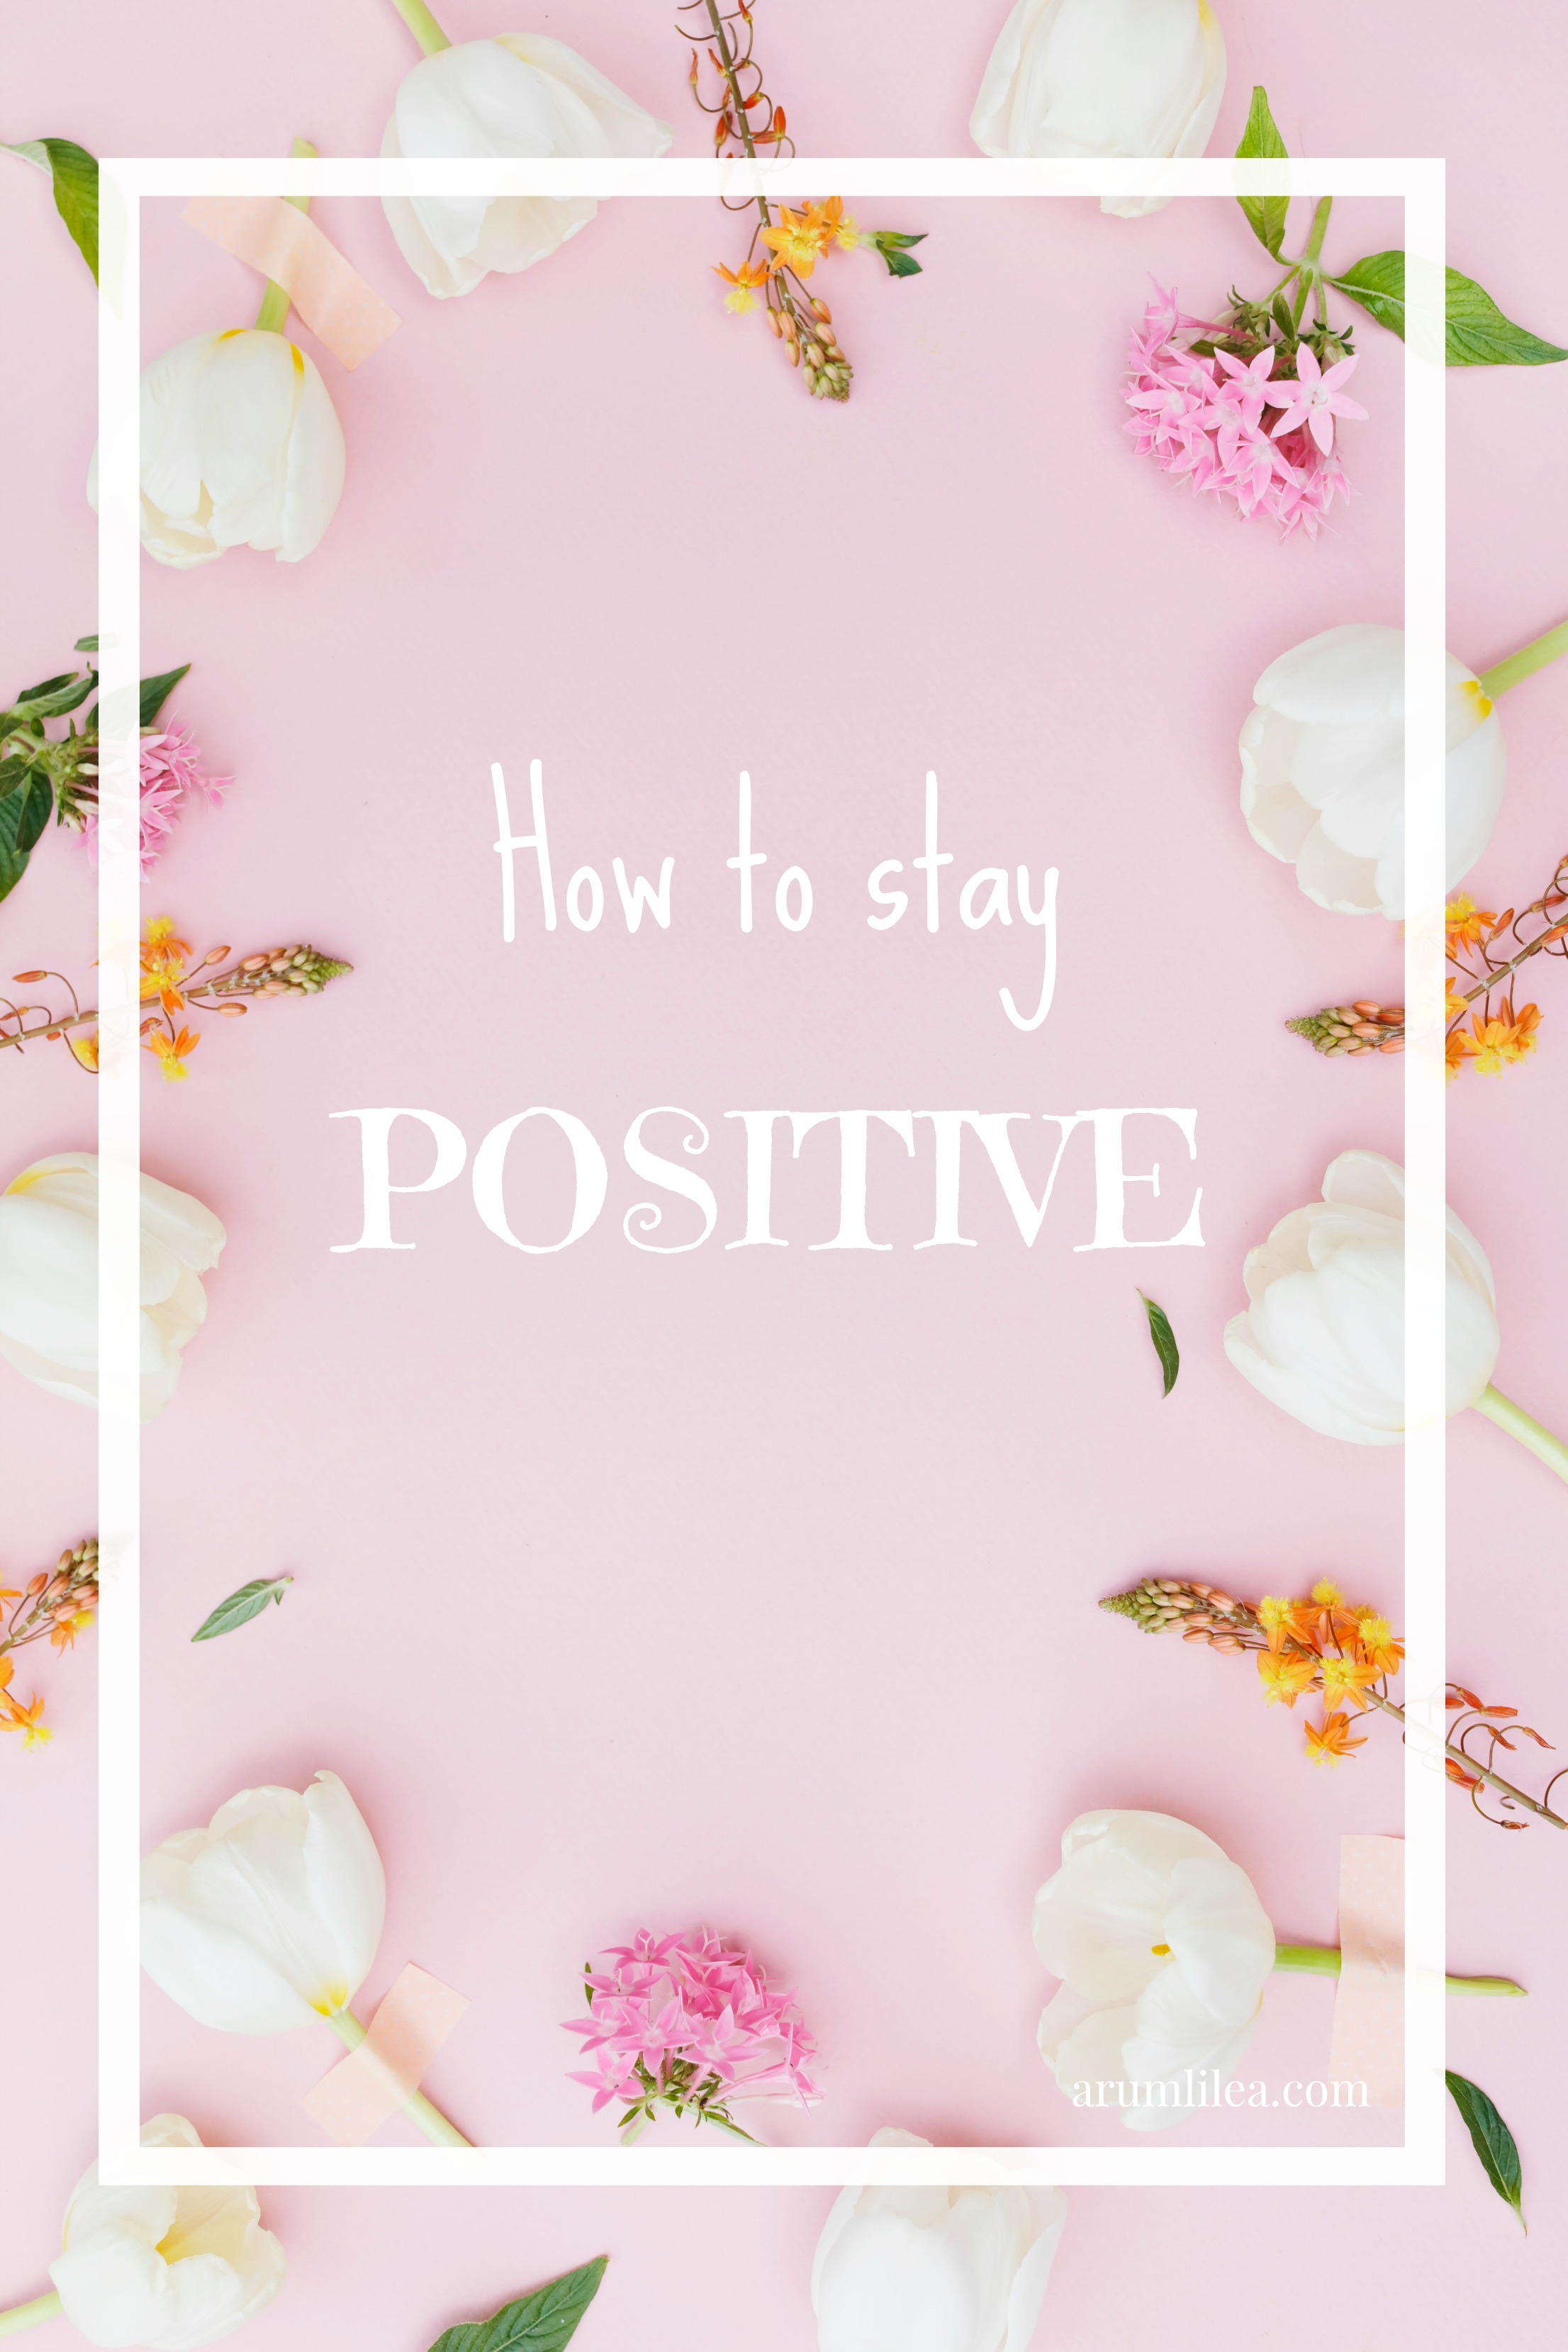 How To Stay Positive: tips on how to live a full and happy life. arumlilea.com